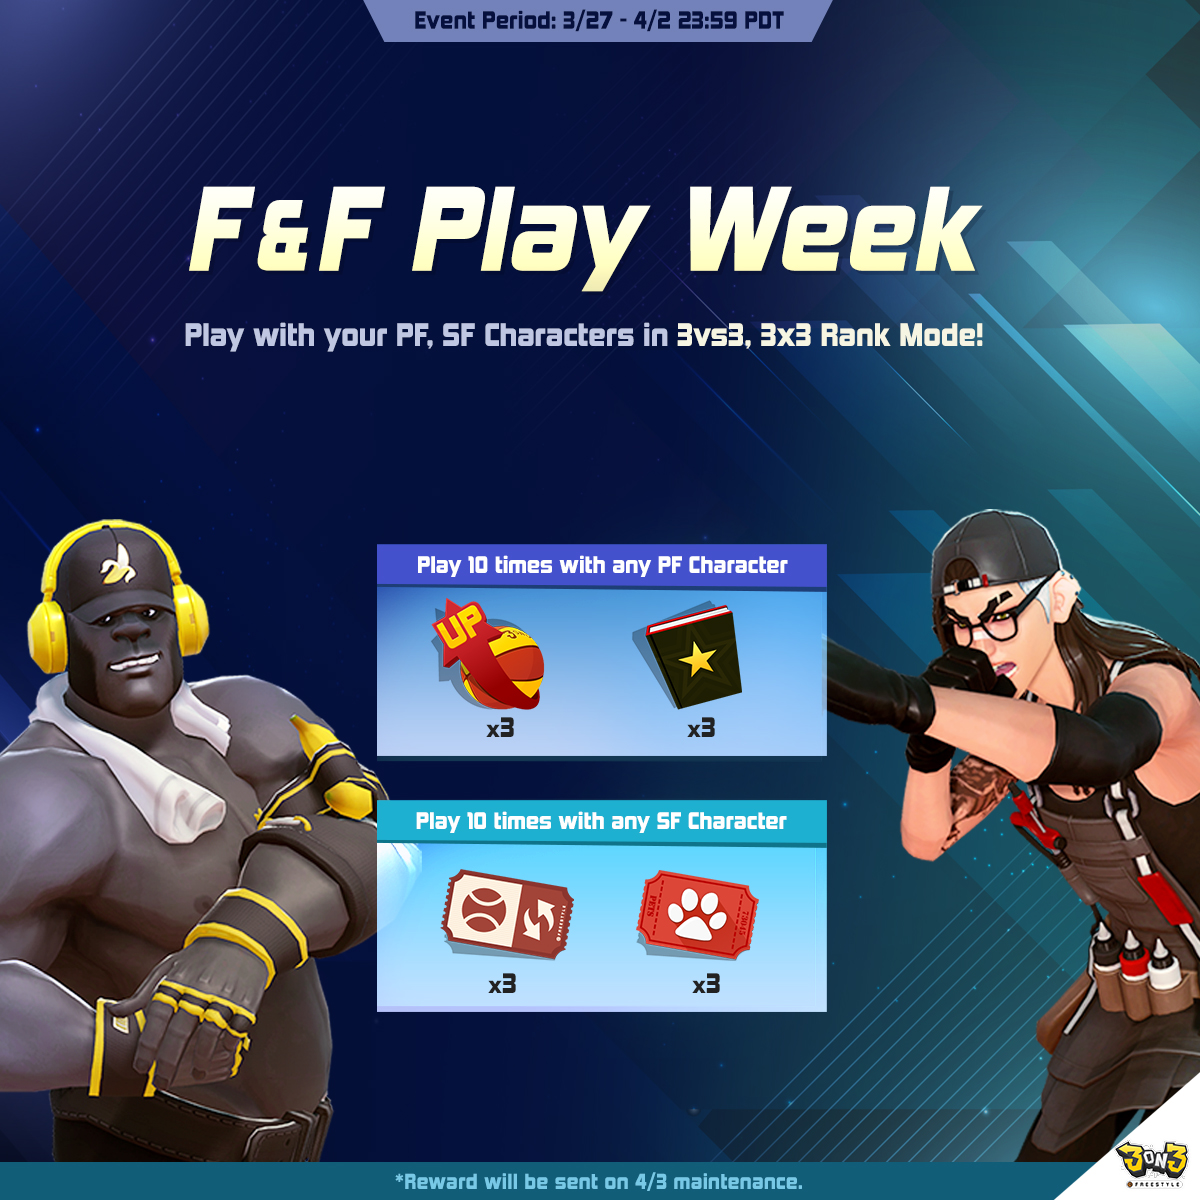 Dive into the ultimate hoop action during our F&F Play Week! From March 27th to April 2nd, play with your PF and SF characters and dominate the court in 3v3 and Rank 3x3 mode! *Reward will be sent on 4/3 maintenance #videogame #StreetBasketball #3on3freestyle